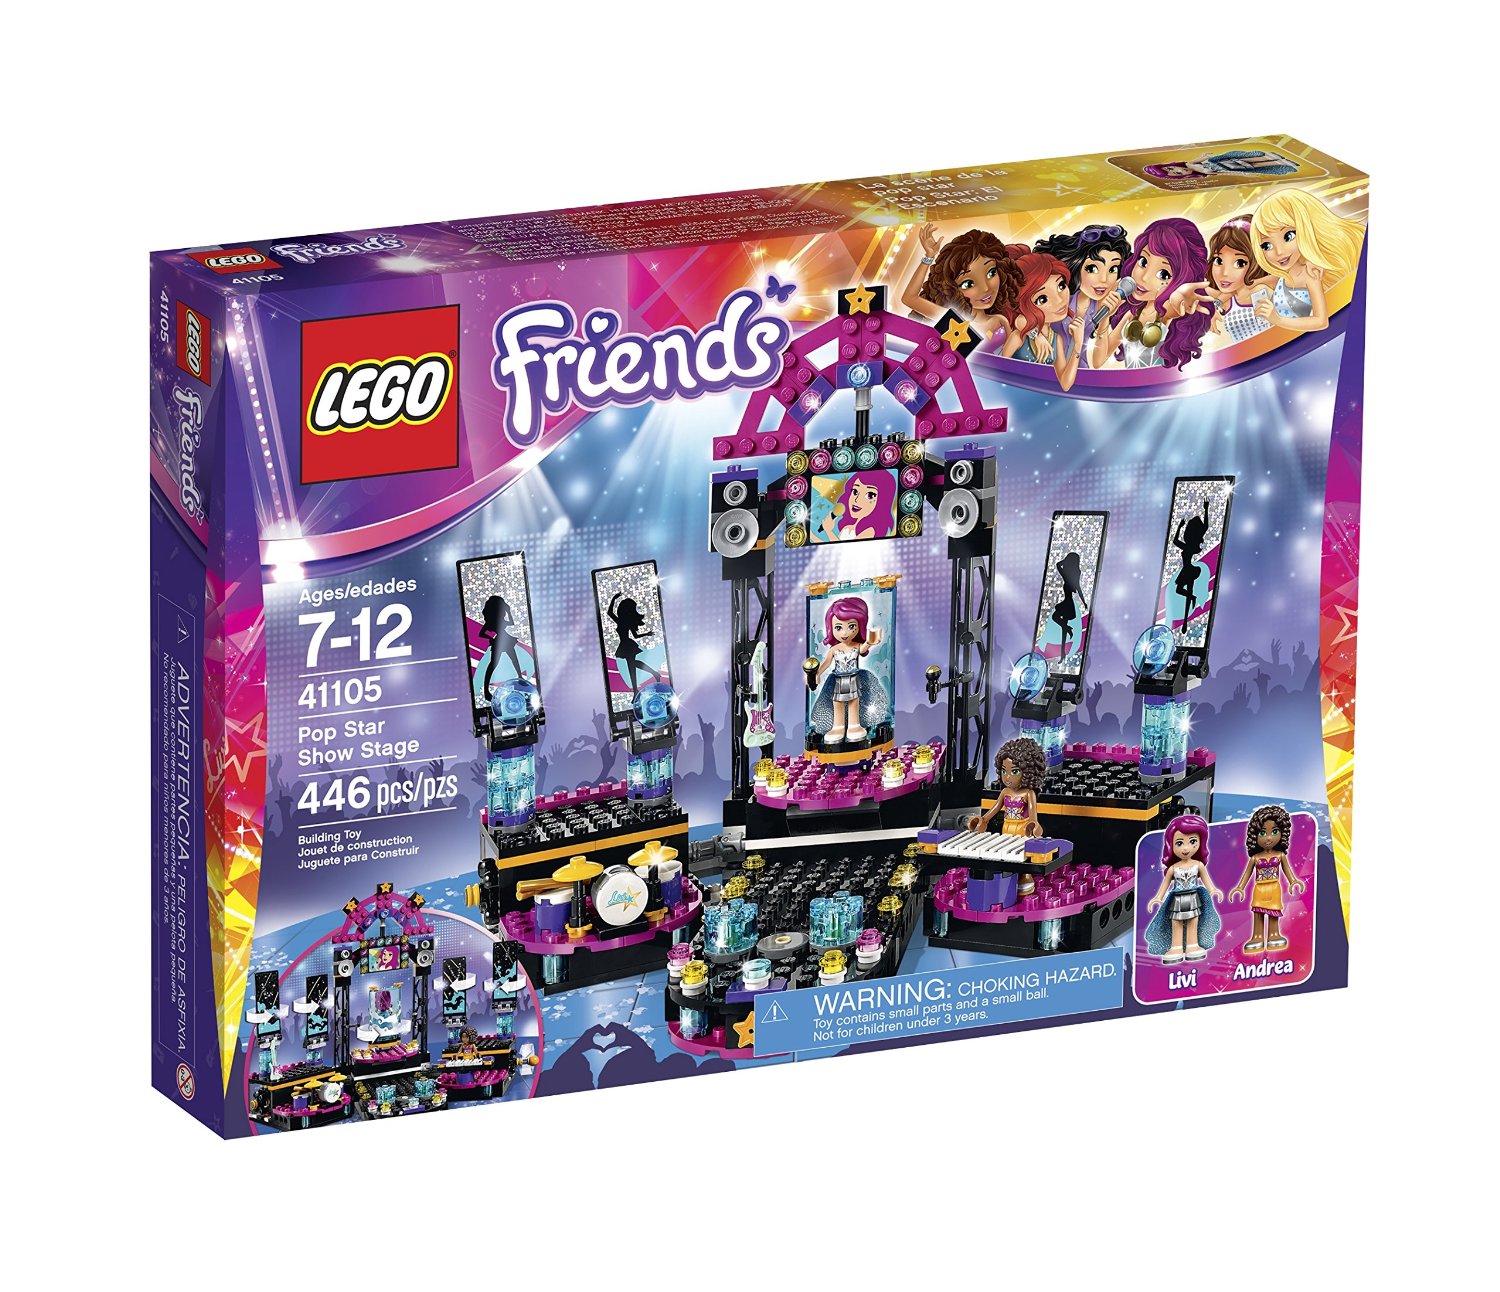 LEGO Friends 41105 Pop Star Show Stage Building Kit – Just $27.98!